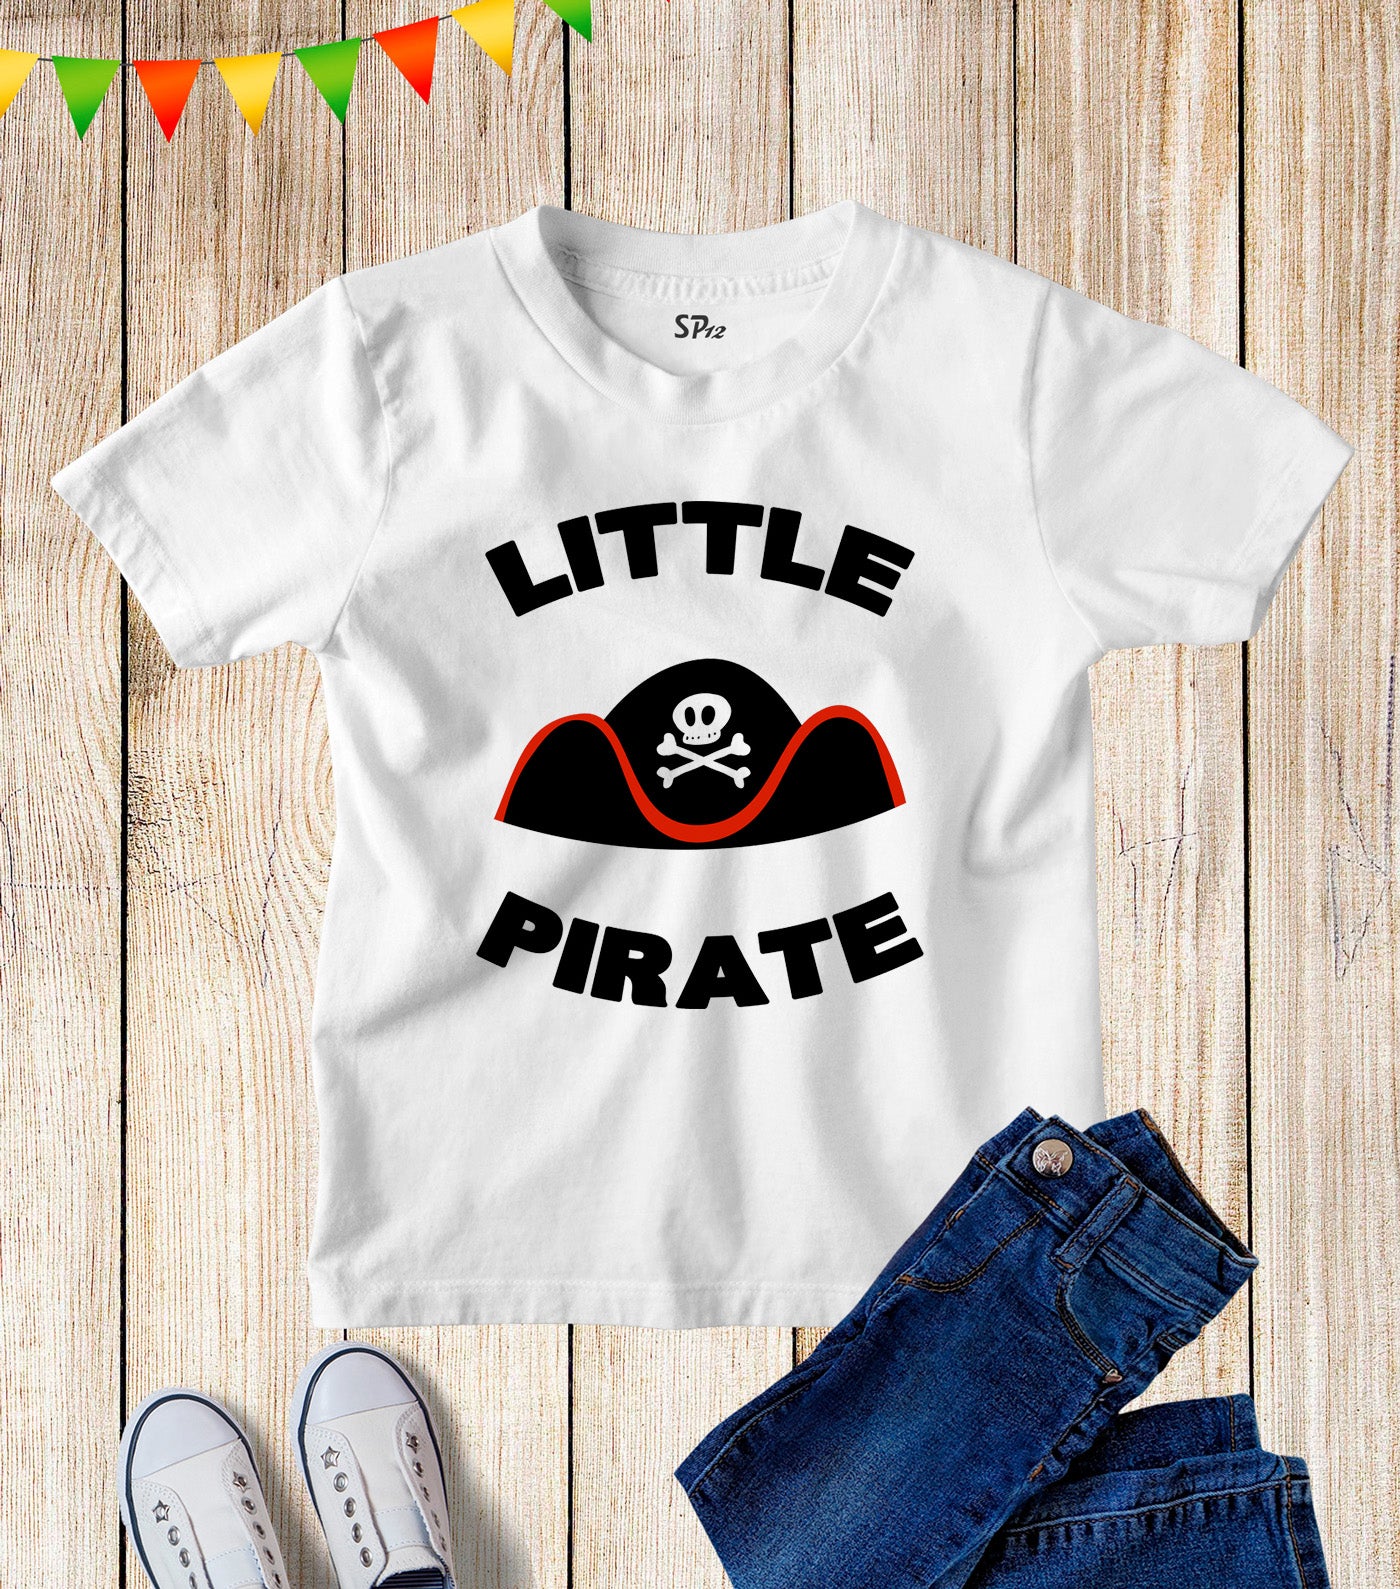 Little Pirate Funny Kids Gift t Shirt